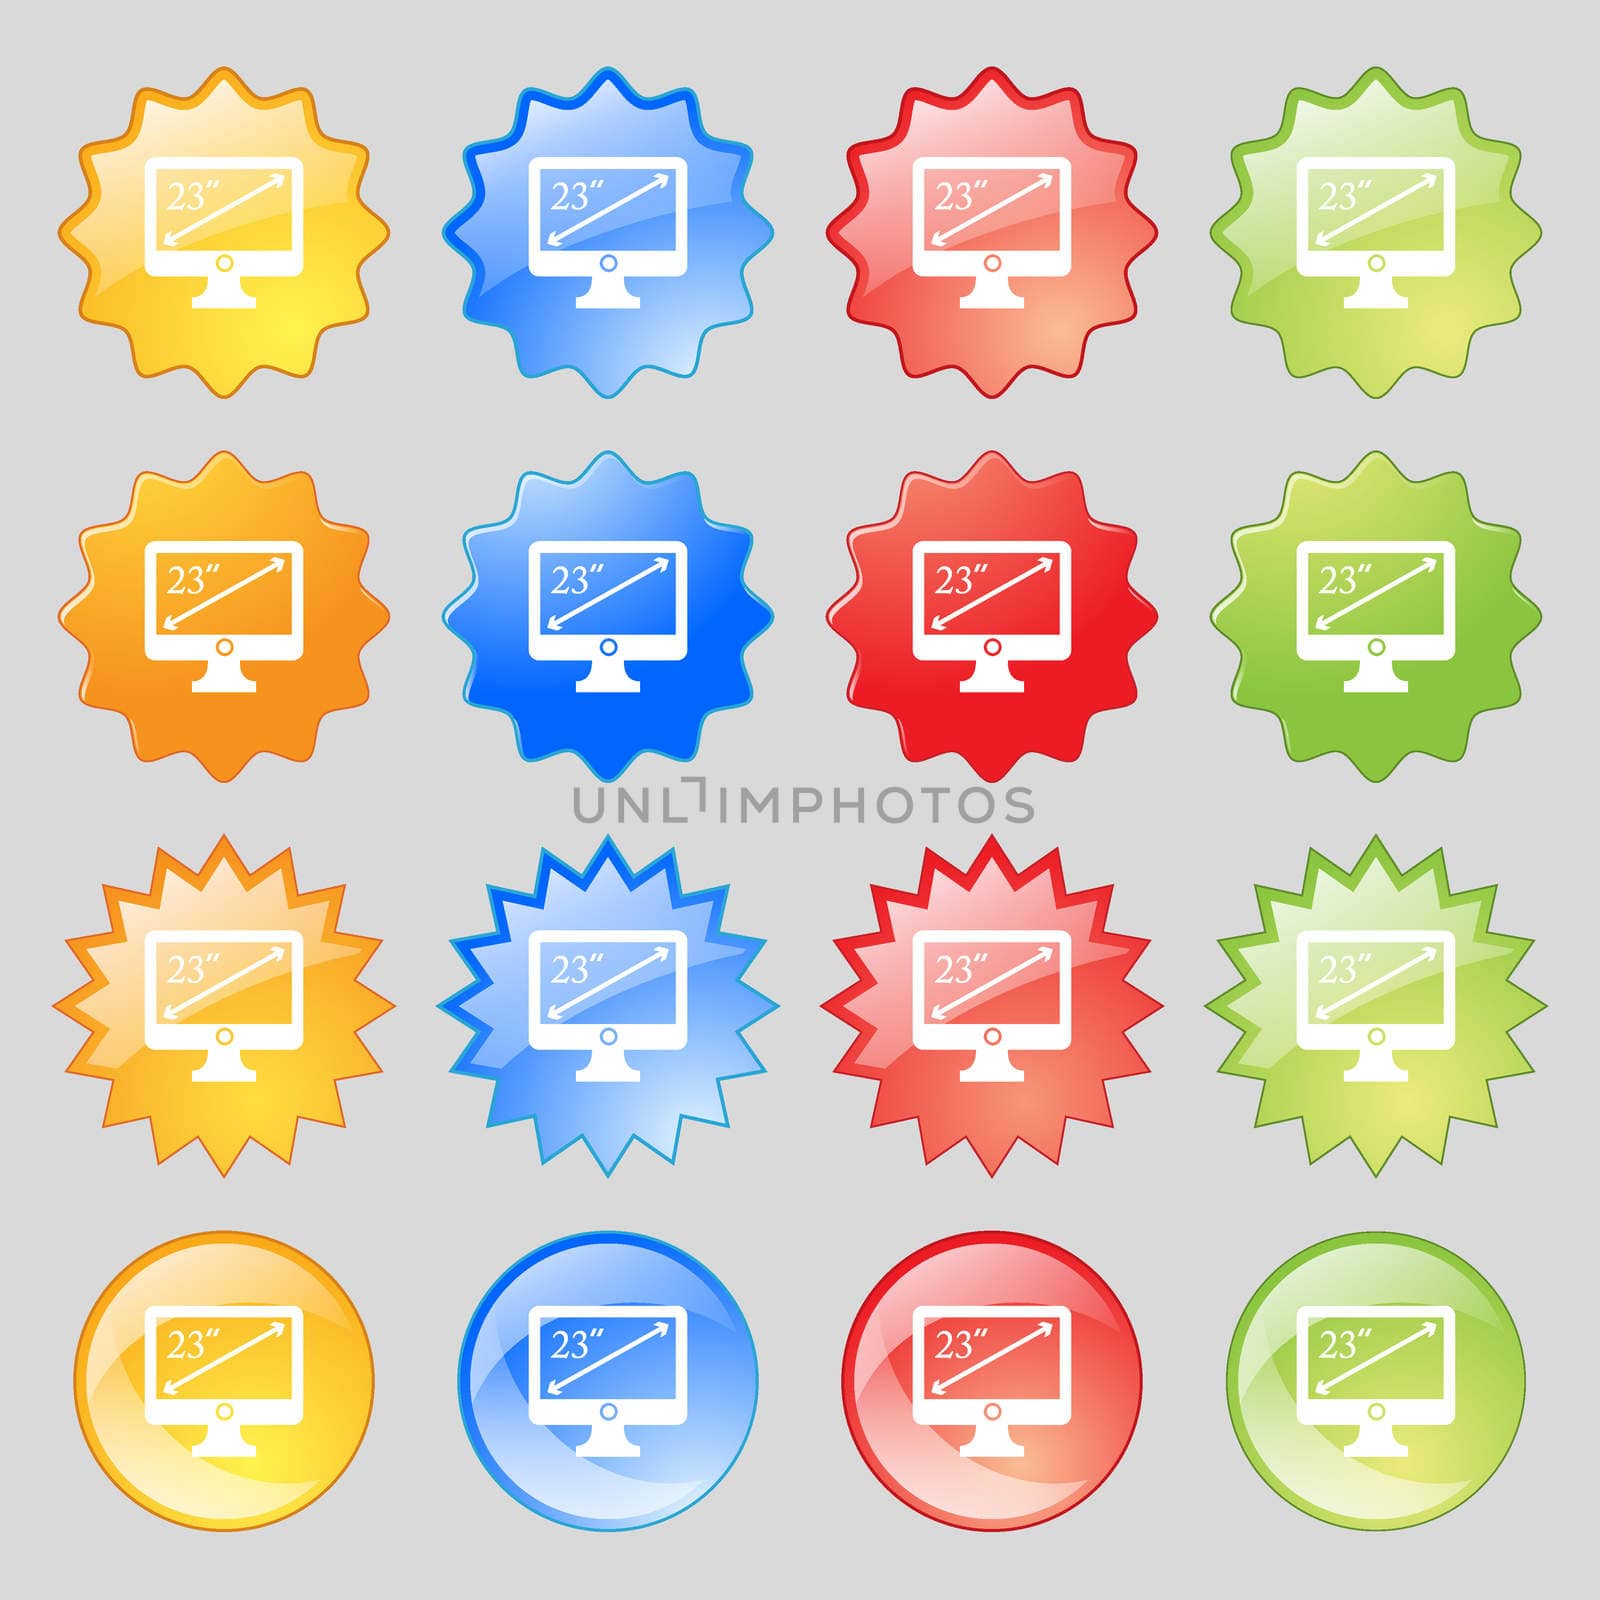 diagonal of the monitor 23 inches icon sign. Big set of 16 colorful modern buttons for your design. illustration